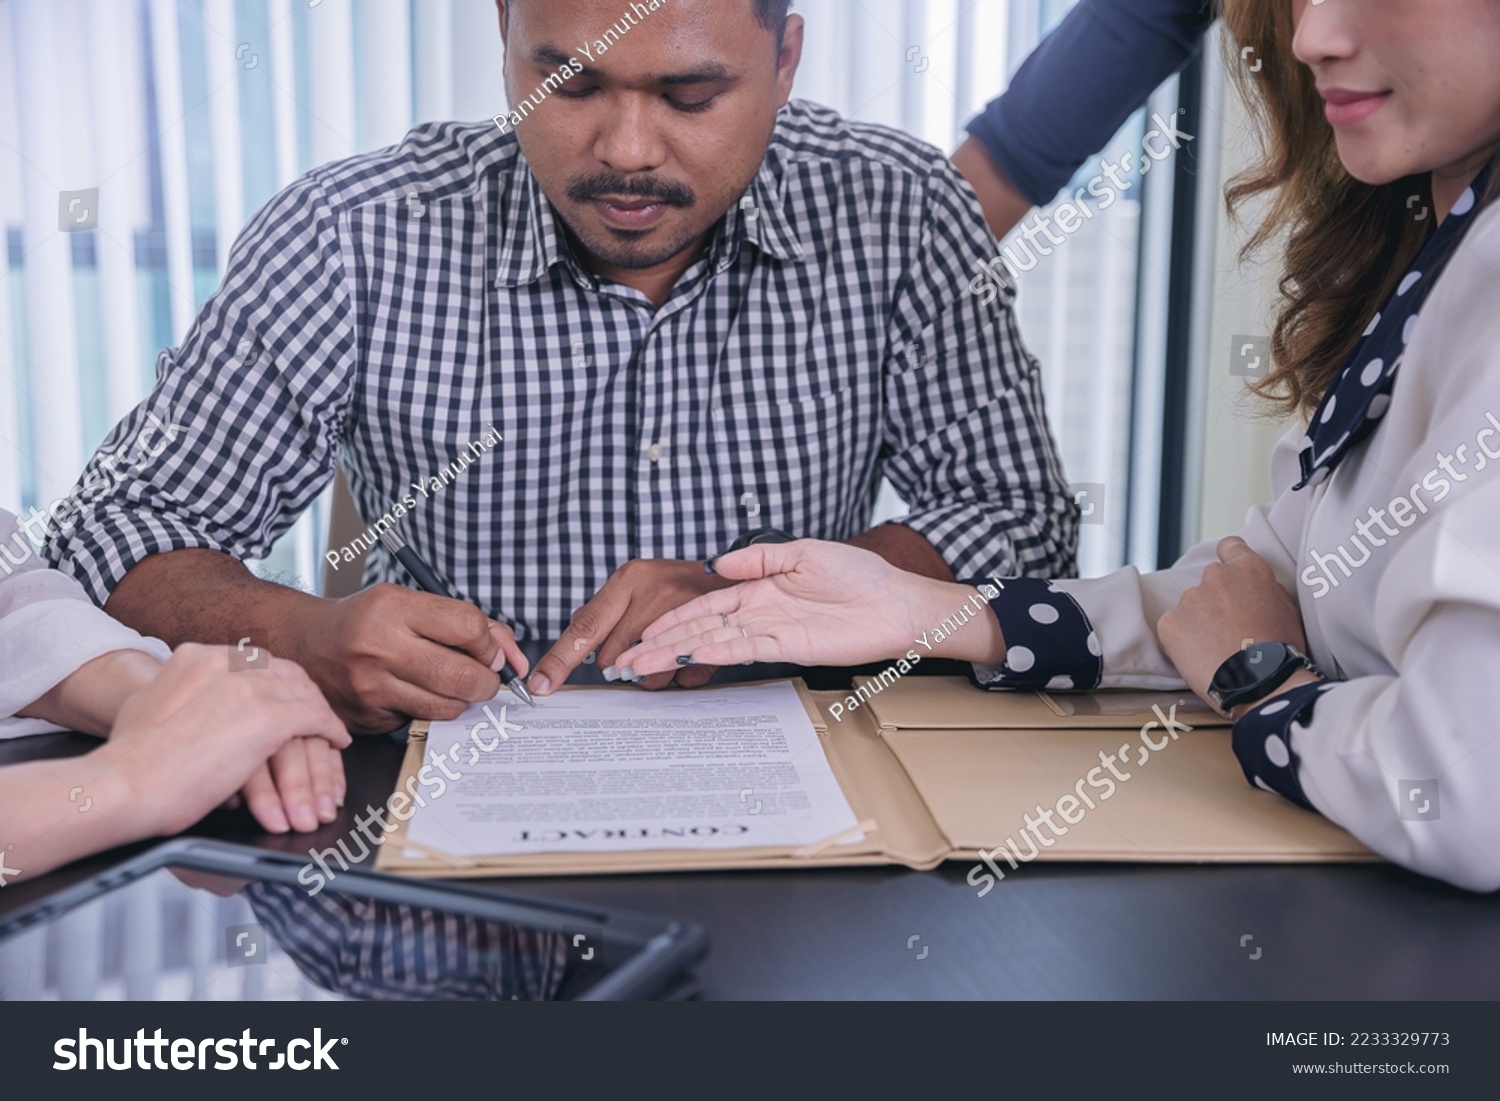 Businessman puts signature on contract at business meeting after negotiations with business partners. Selected focus #2233329773